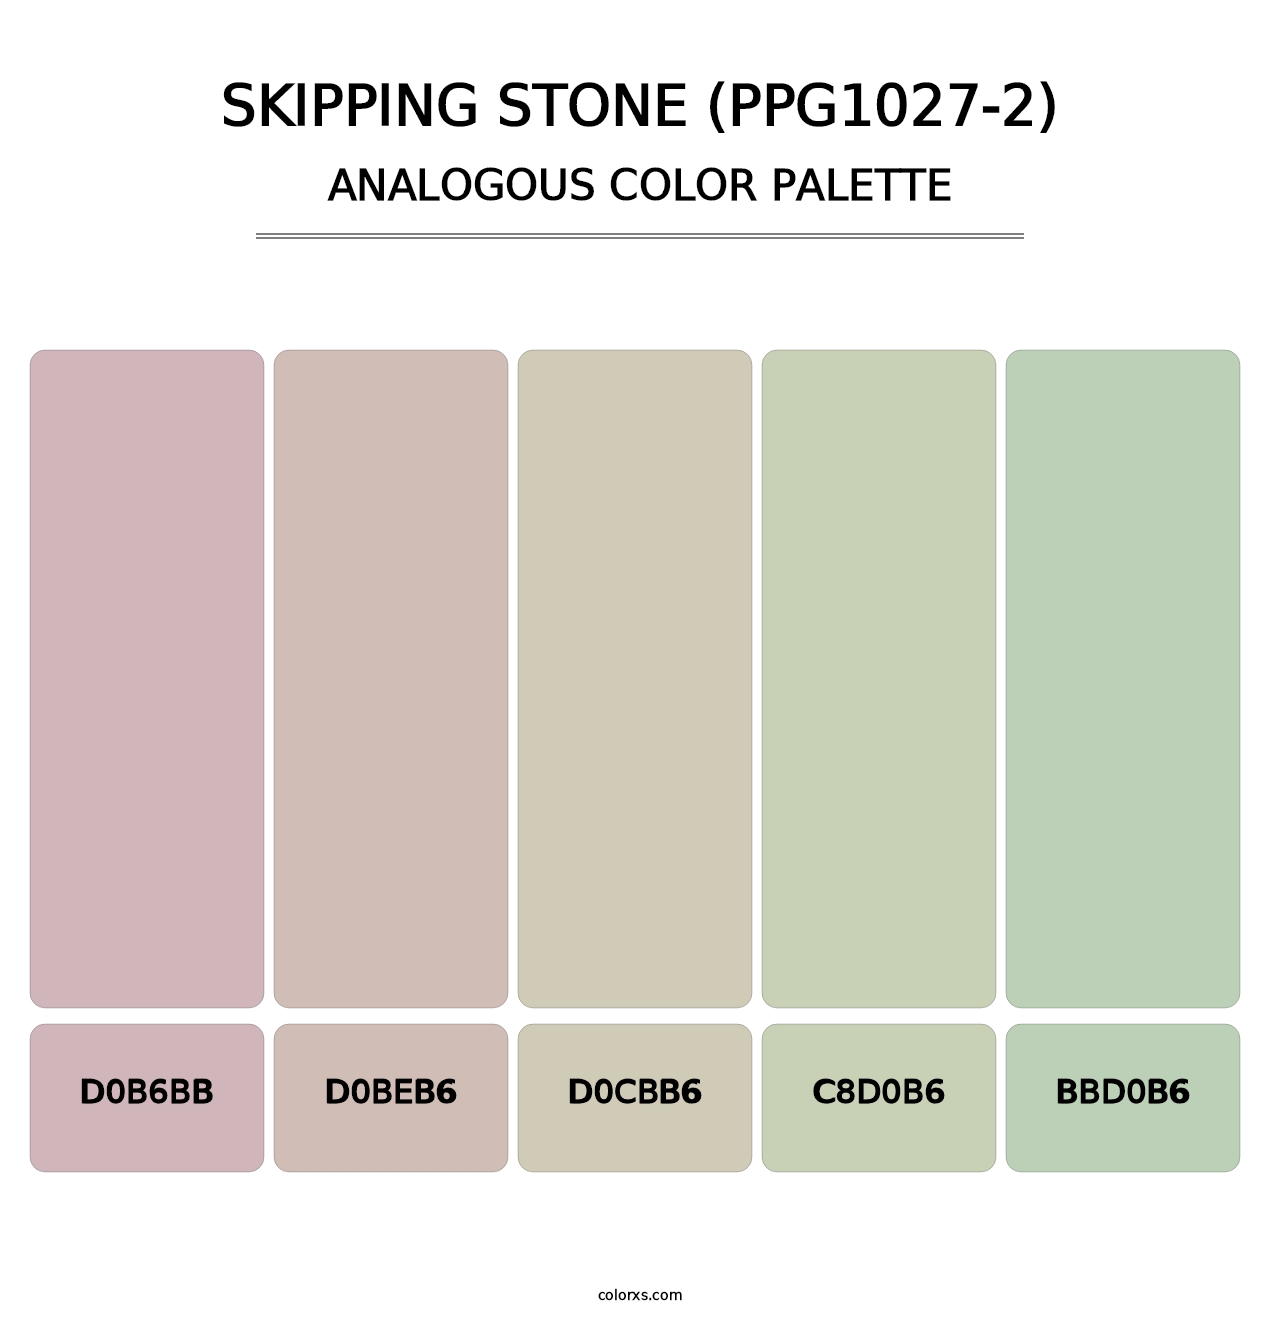 Skipping Stone (PPG1027-2) - Analogous Color Palette